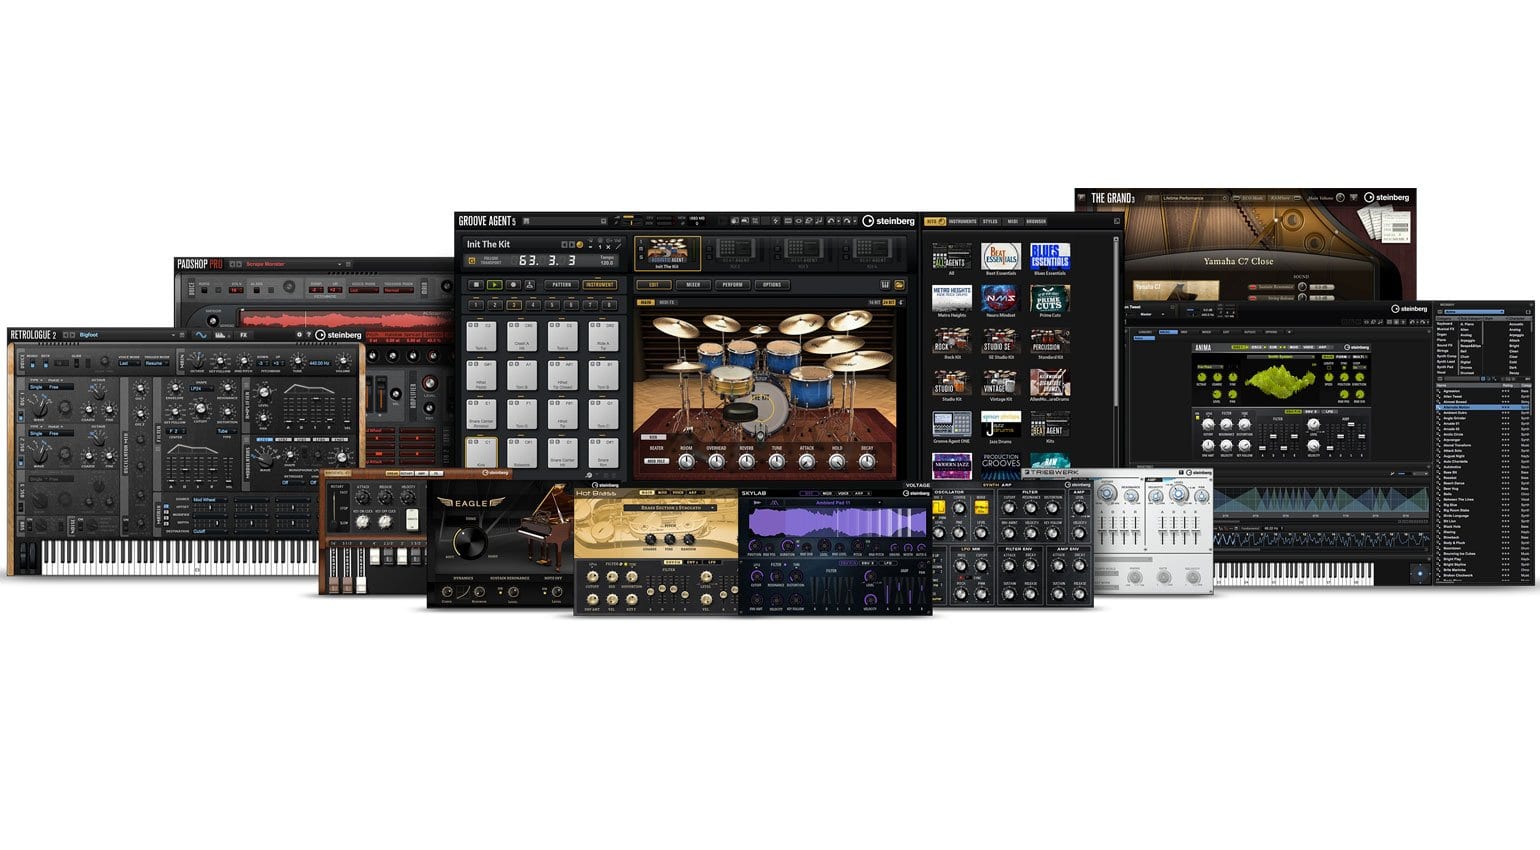 Namm 19 Steinberg Absolute 4 Instrument Collection Is In Excess Of 100gb Gearnews Com